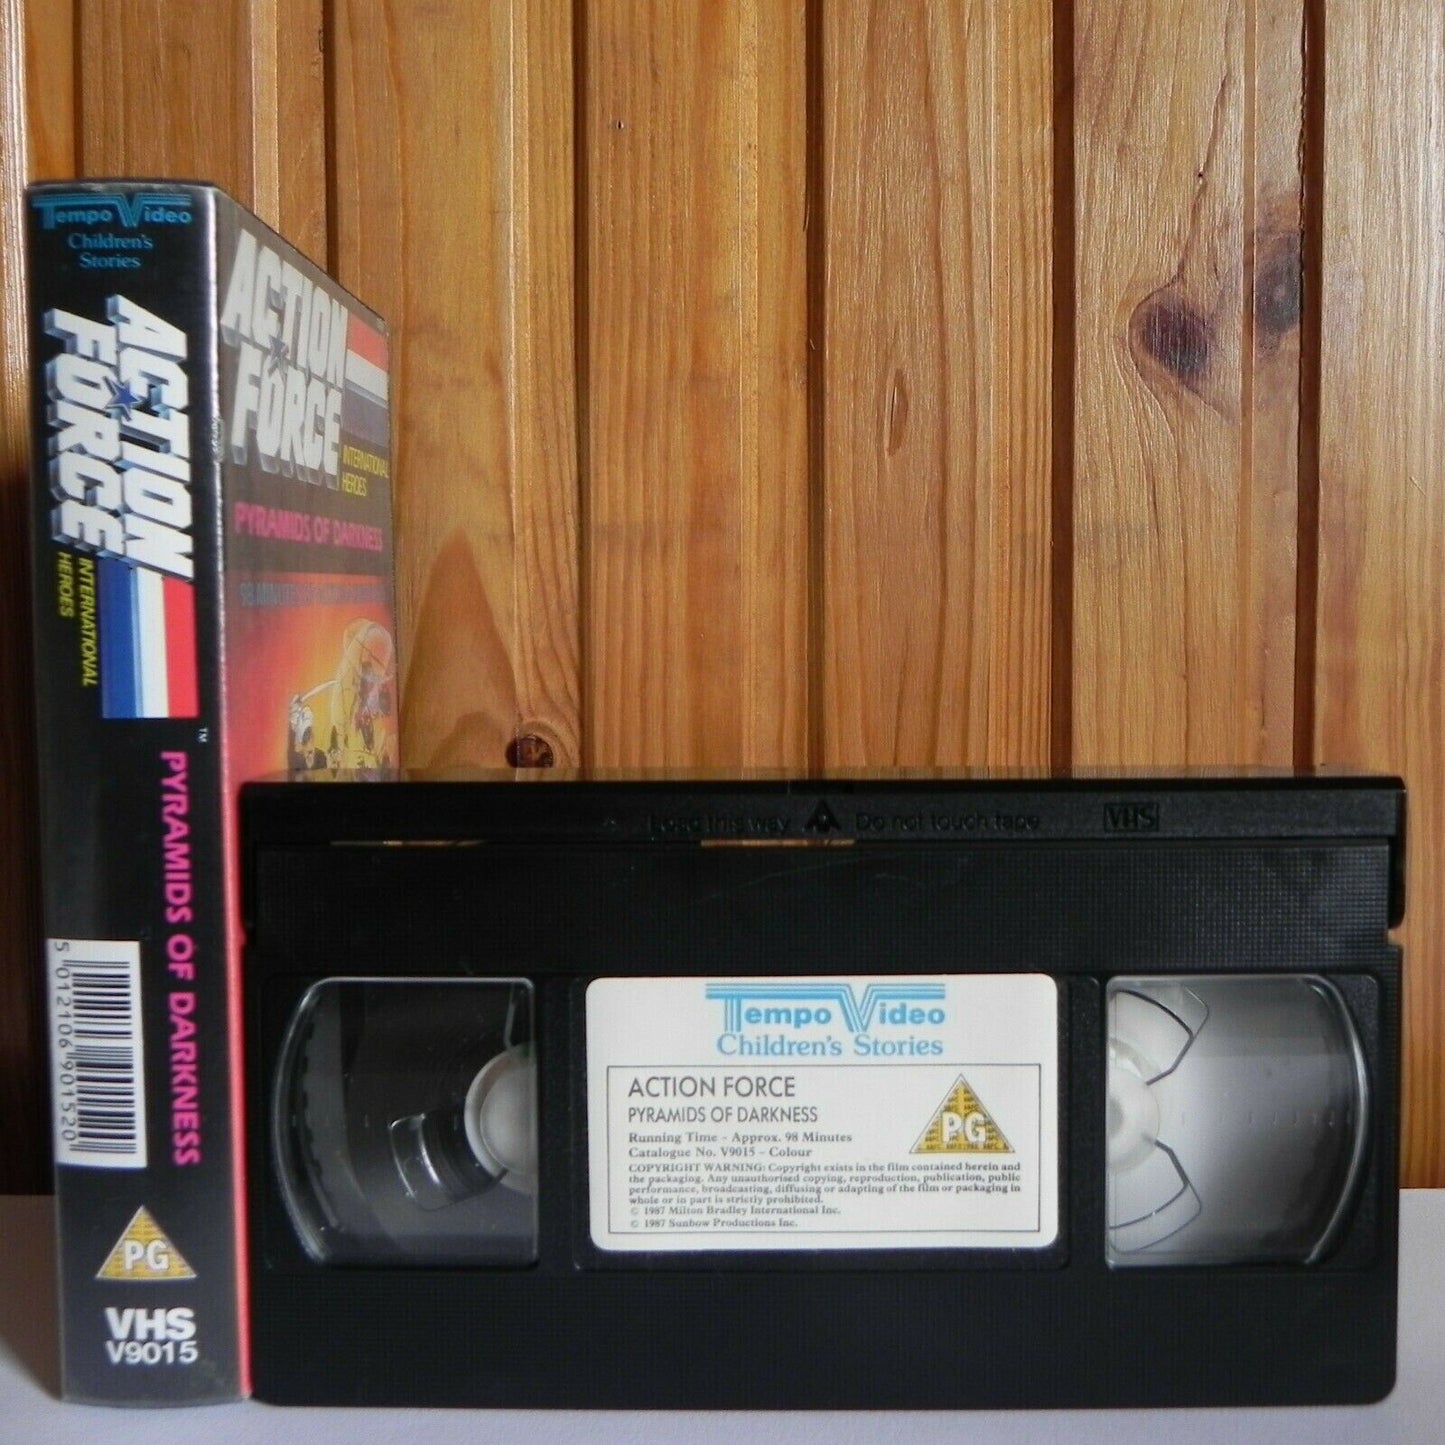 Action Force: Pyramids Of Darkness - Action Adventure - Animated - Kids - VHS-